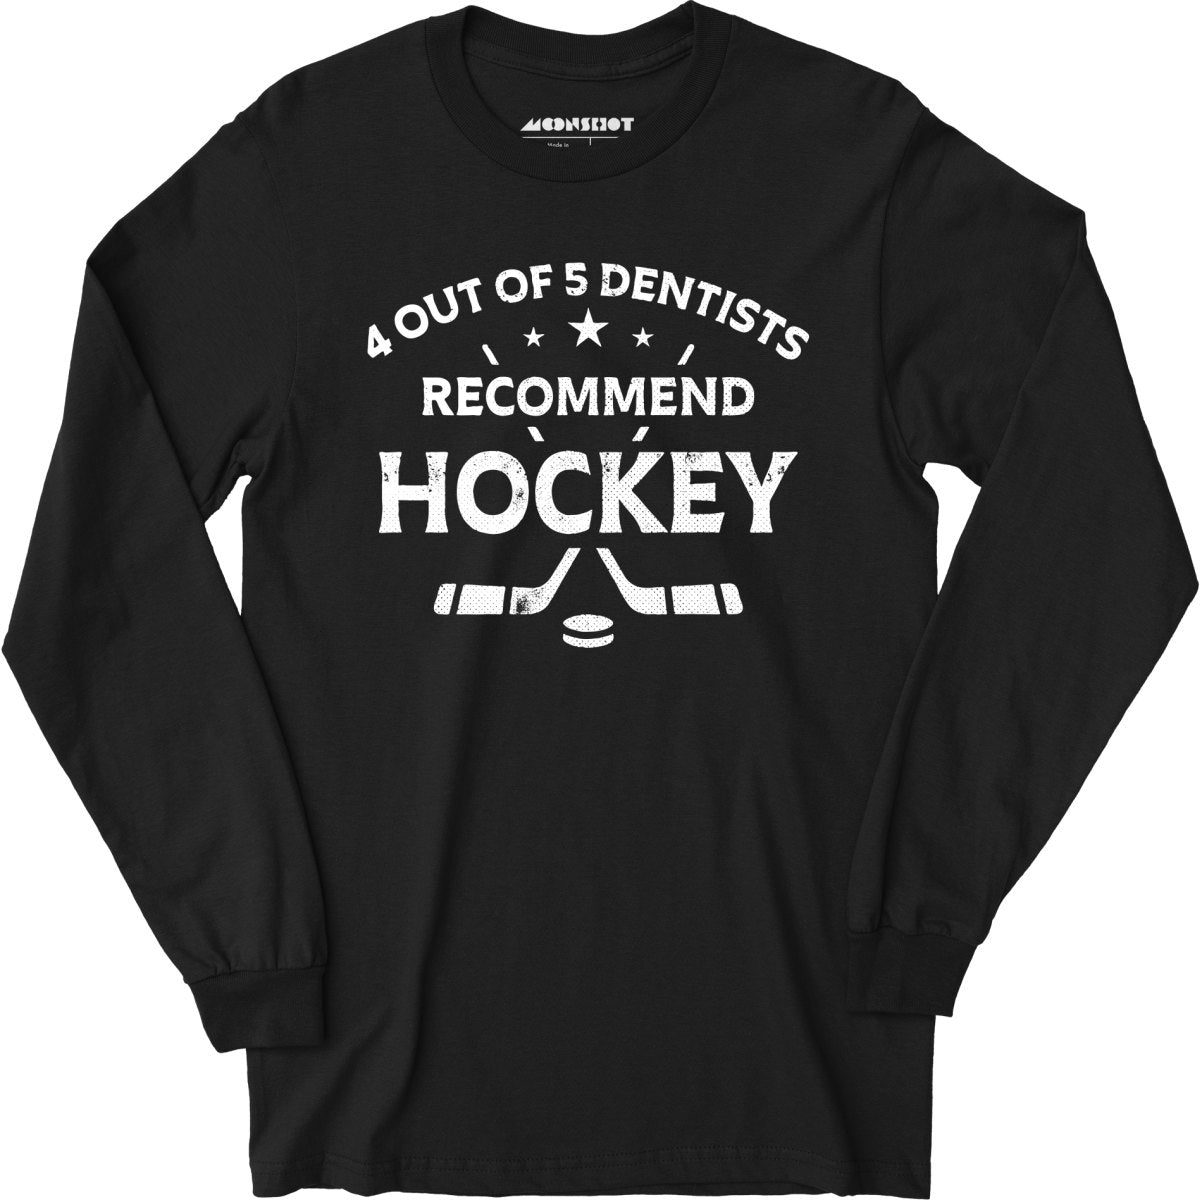 4 Out of 5 Dentists Recommend Hockey - Long Sleeve T-Shirt